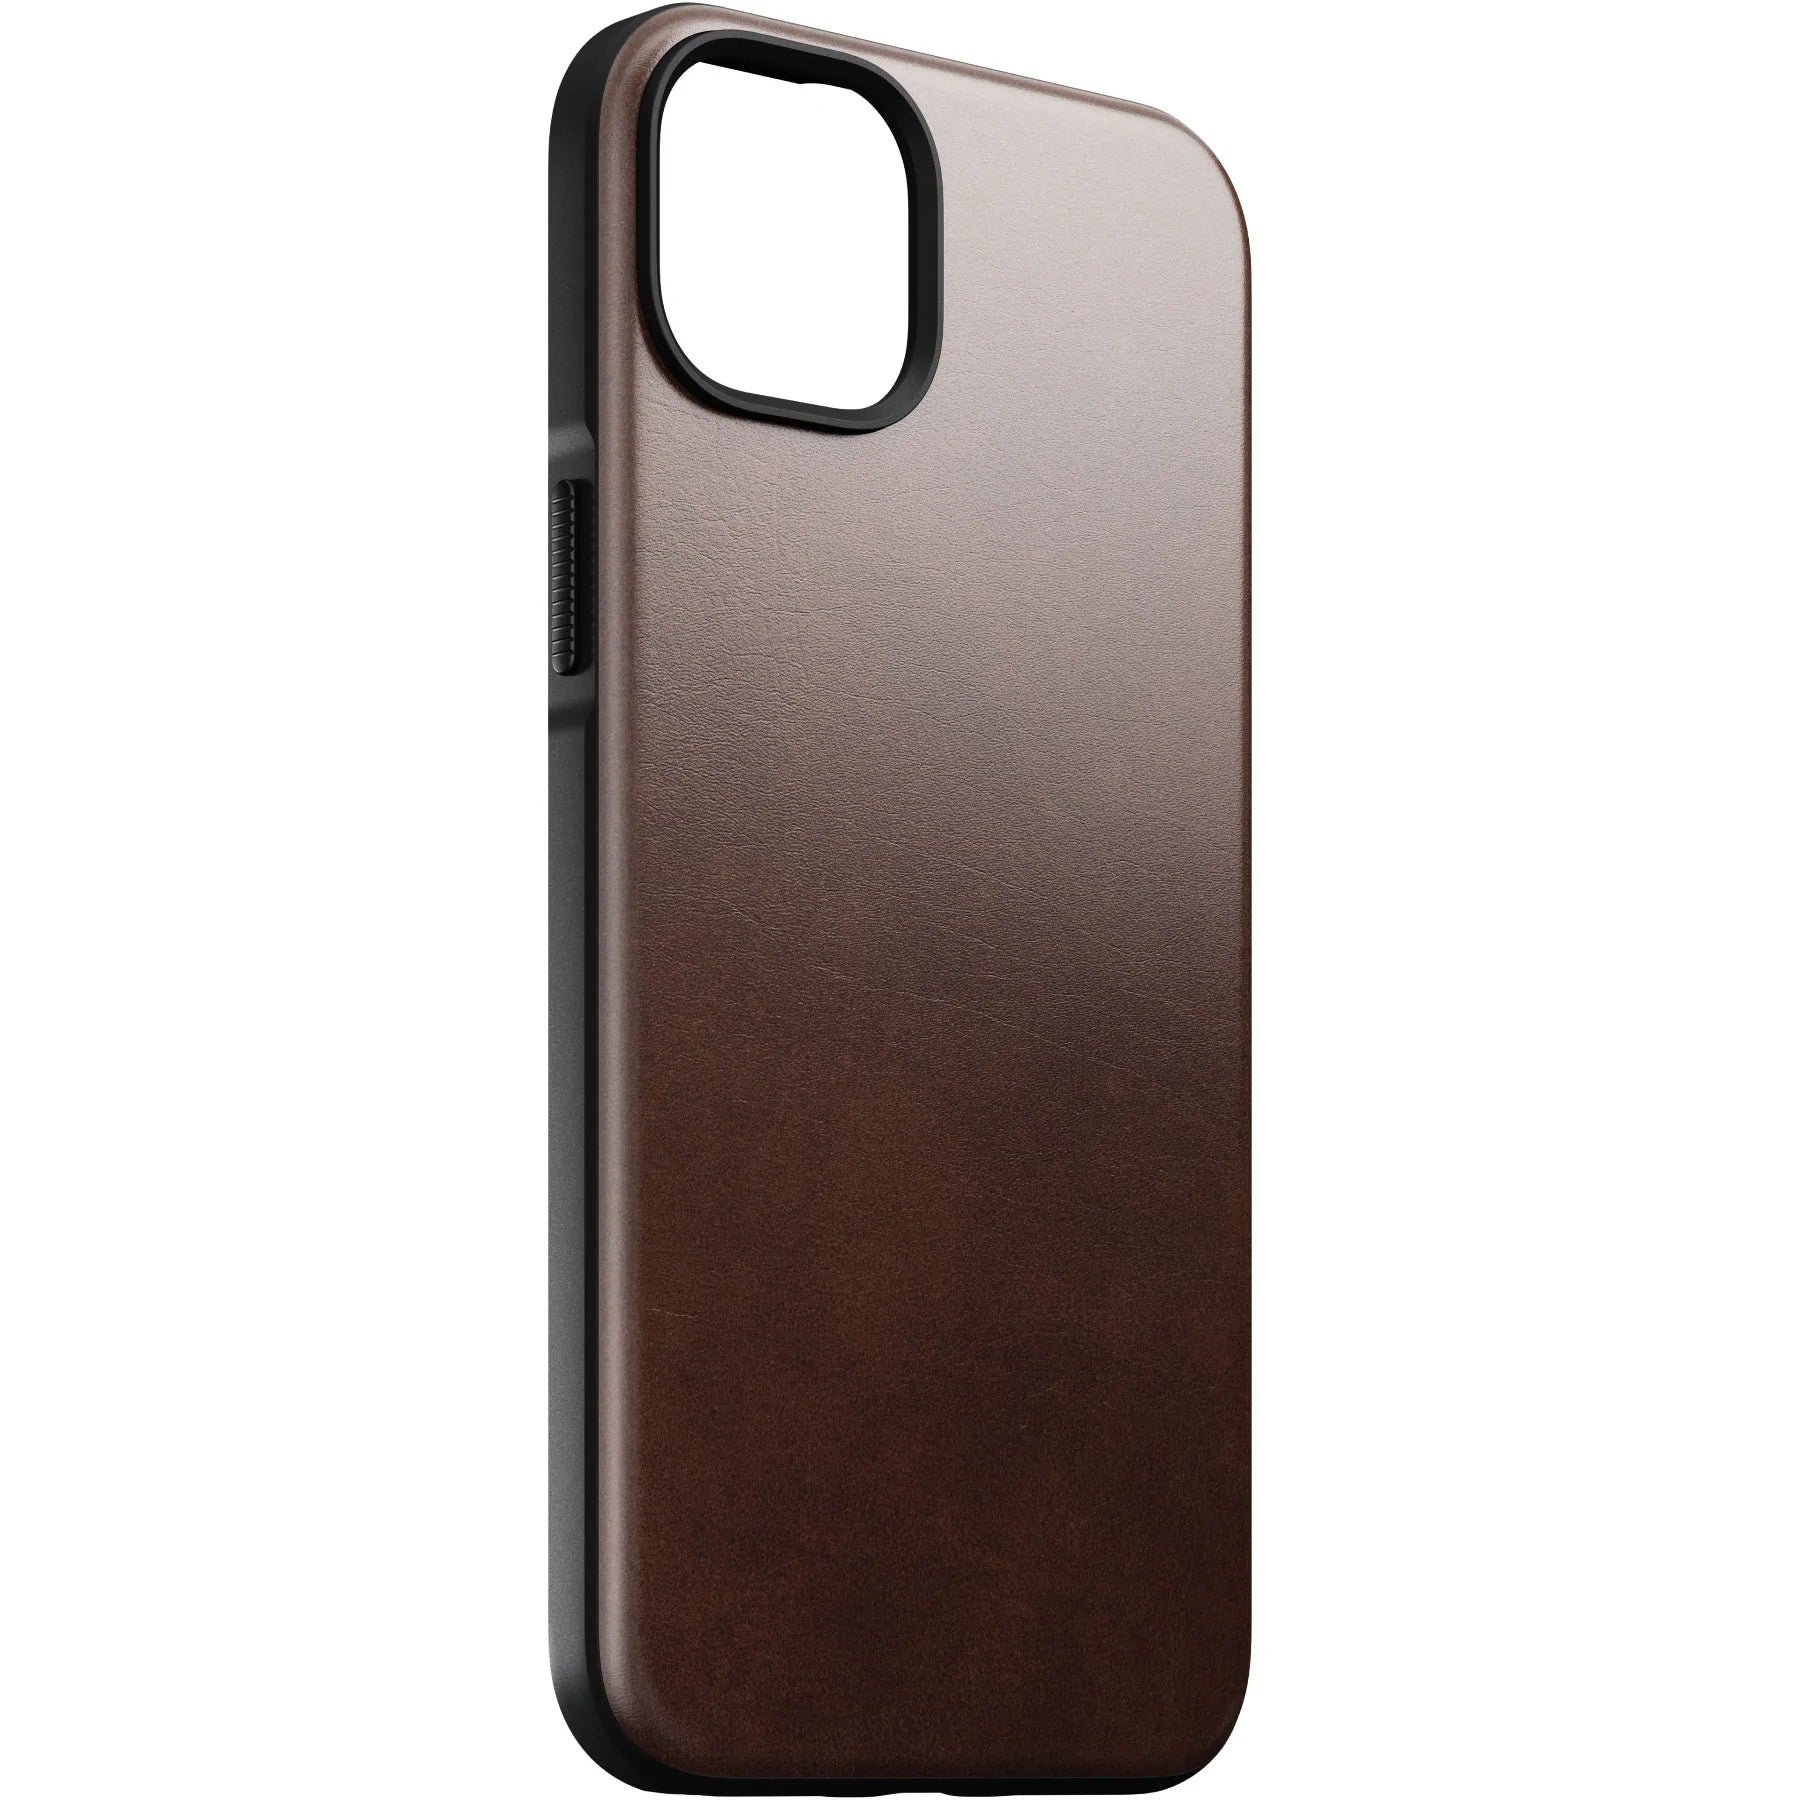 Side view of case. Black side with brown leather for the back